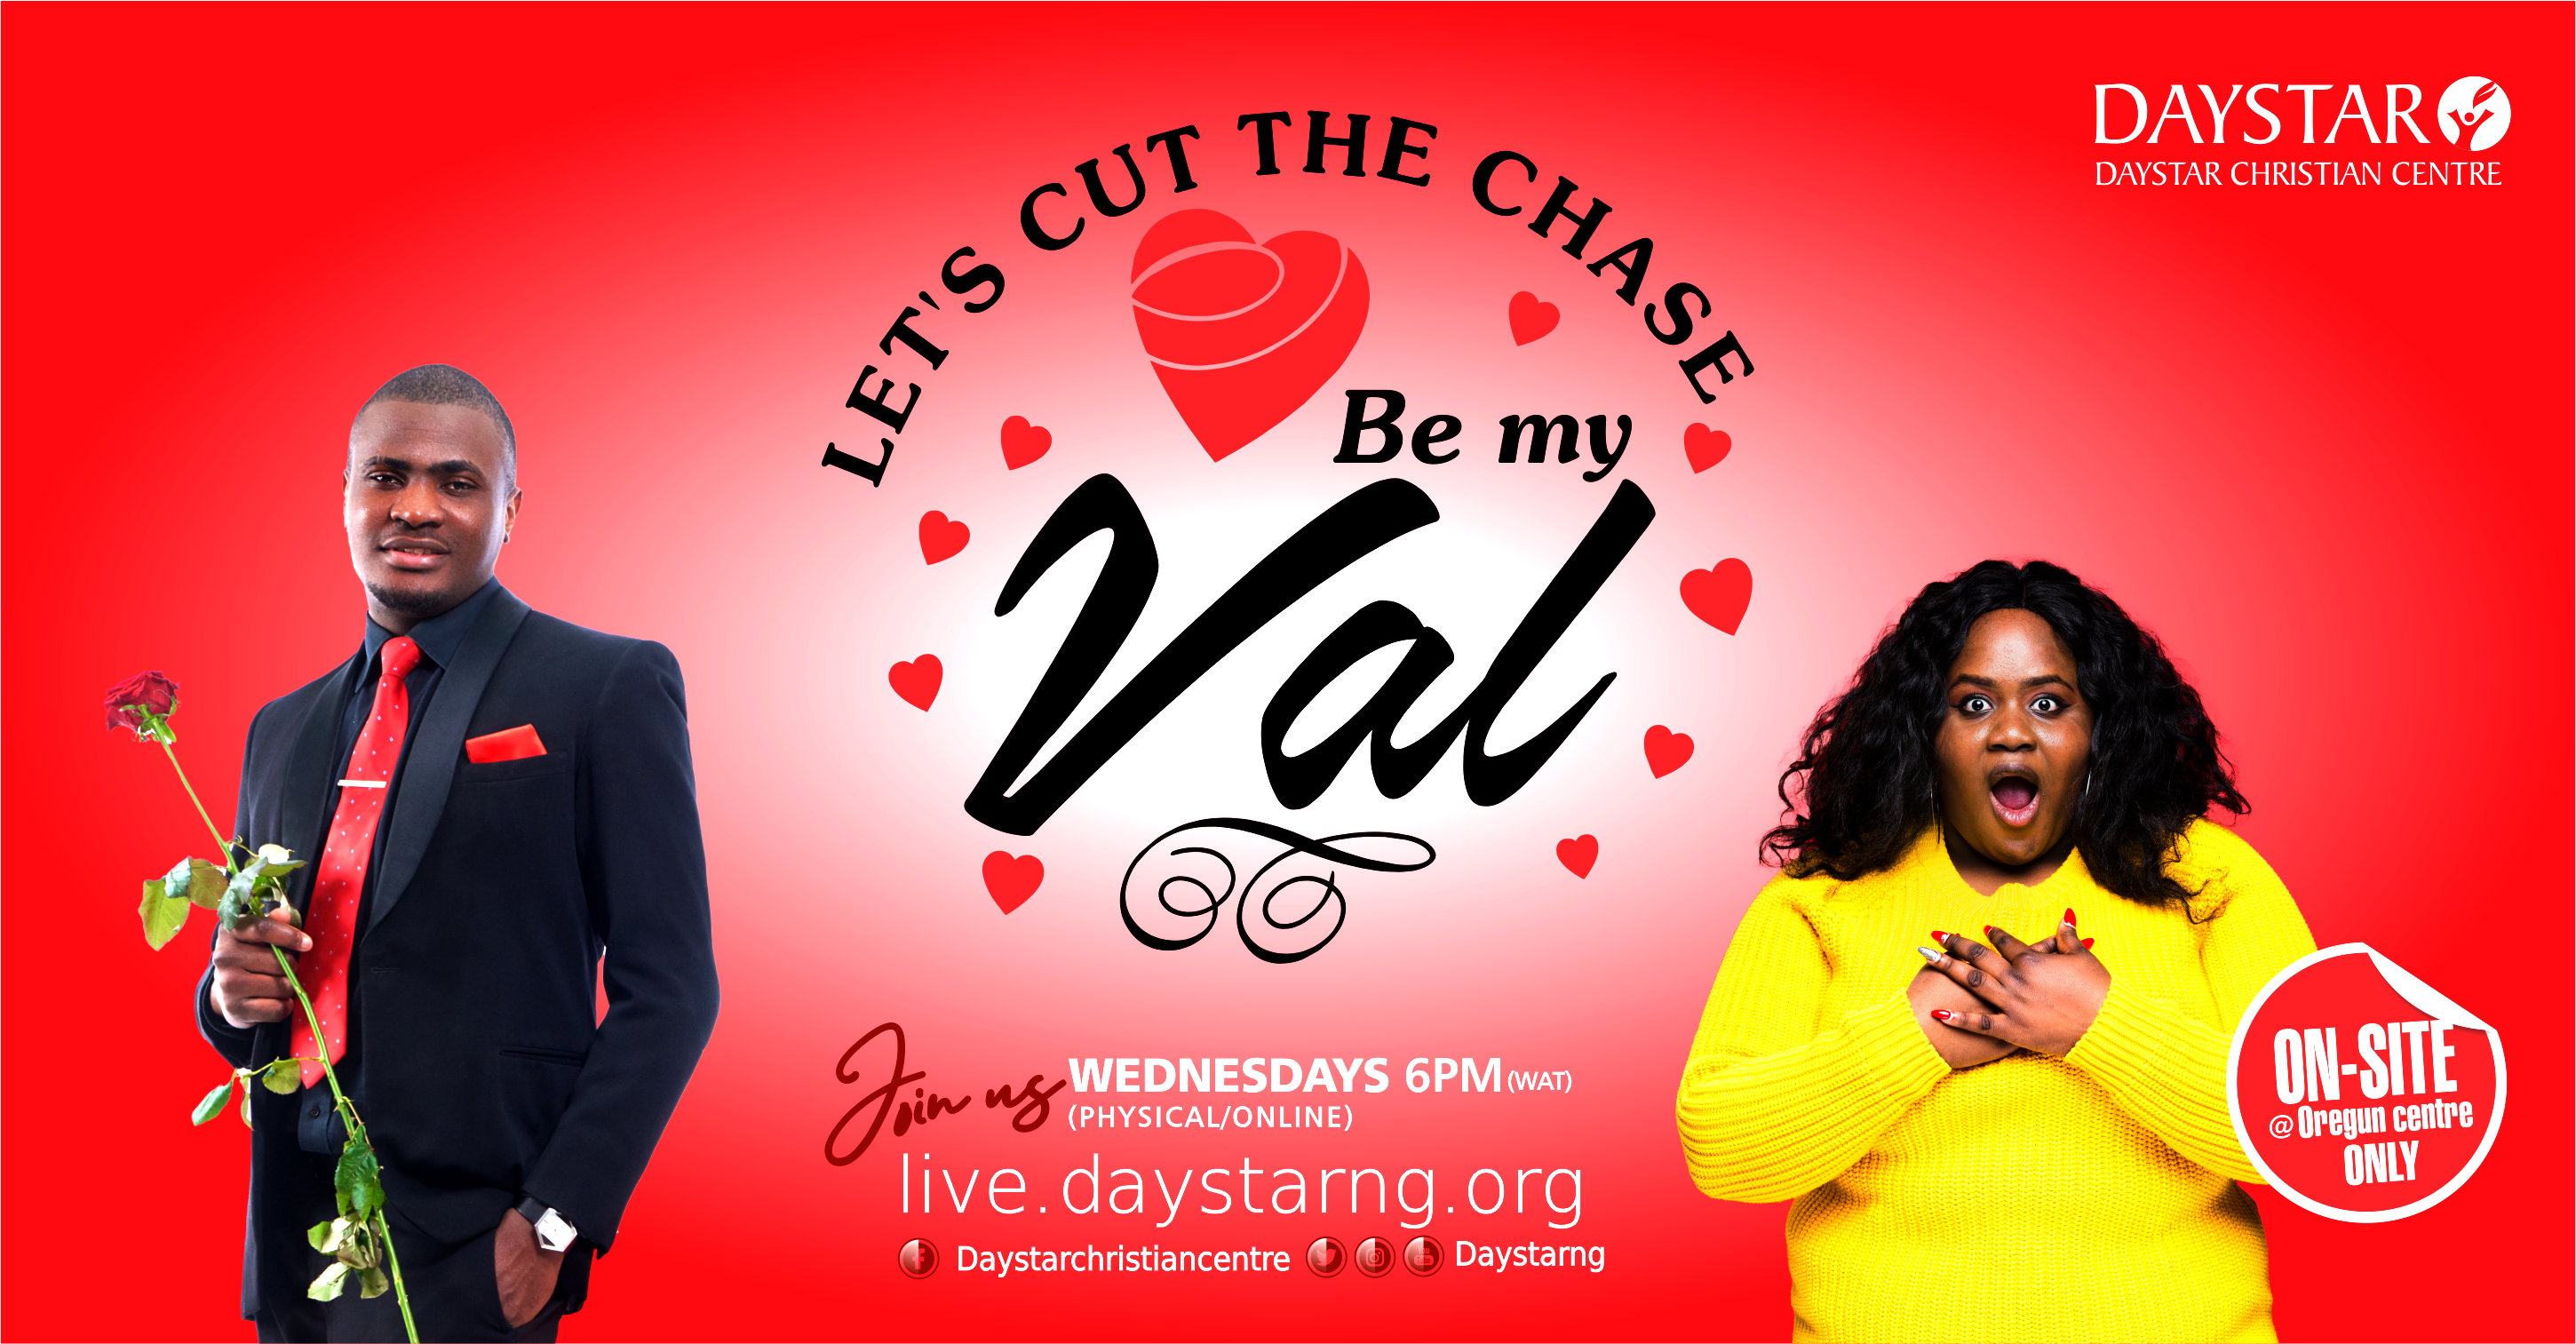 Let’s Cut the Chase – Be my Val